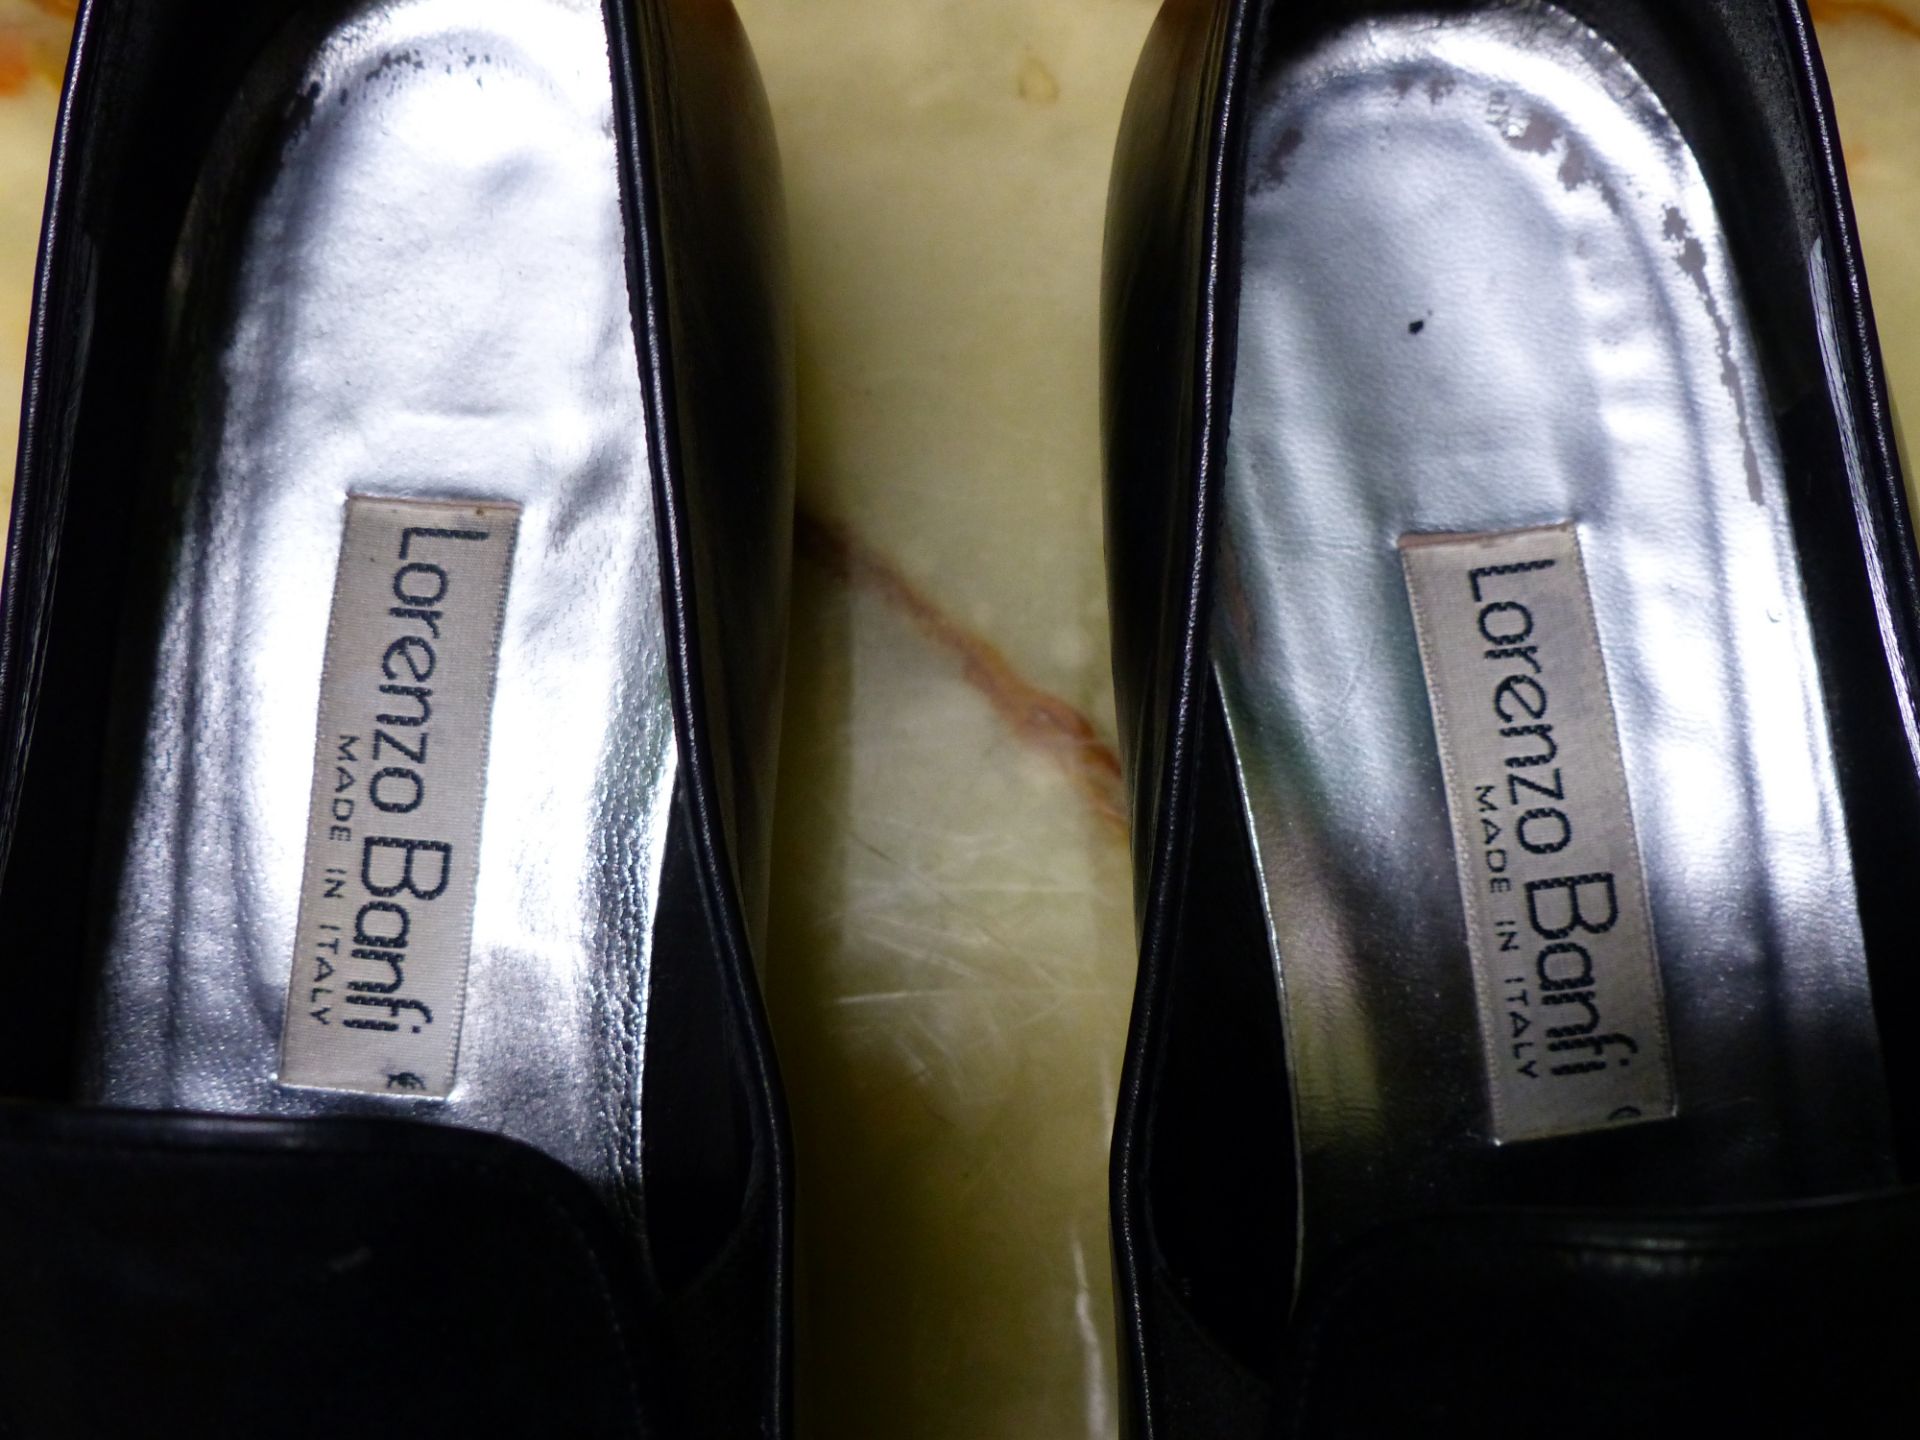 SHOES. LORENZO BANFI ITALY BLACK LEATHER COURT SHOES EUR SIZE 39.5. TOGETHER WITH BROWN BOOTS SIZE - Image 5 of 10